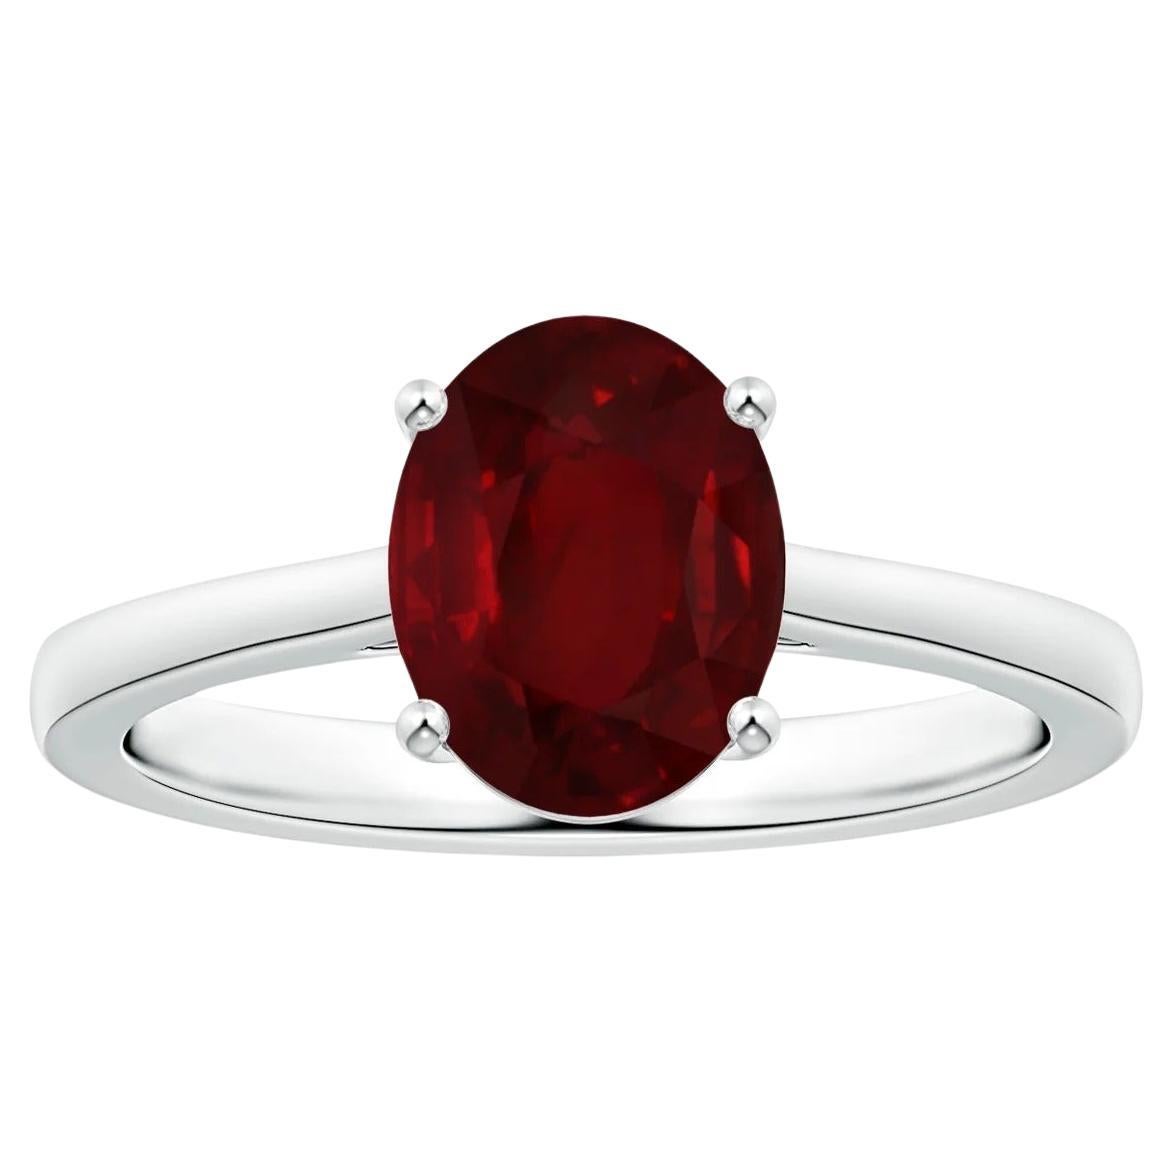 For Sale:  ANGARA GIA Certified Ruby Solitaire Ring in Platinum with Reverse Tapered Shank